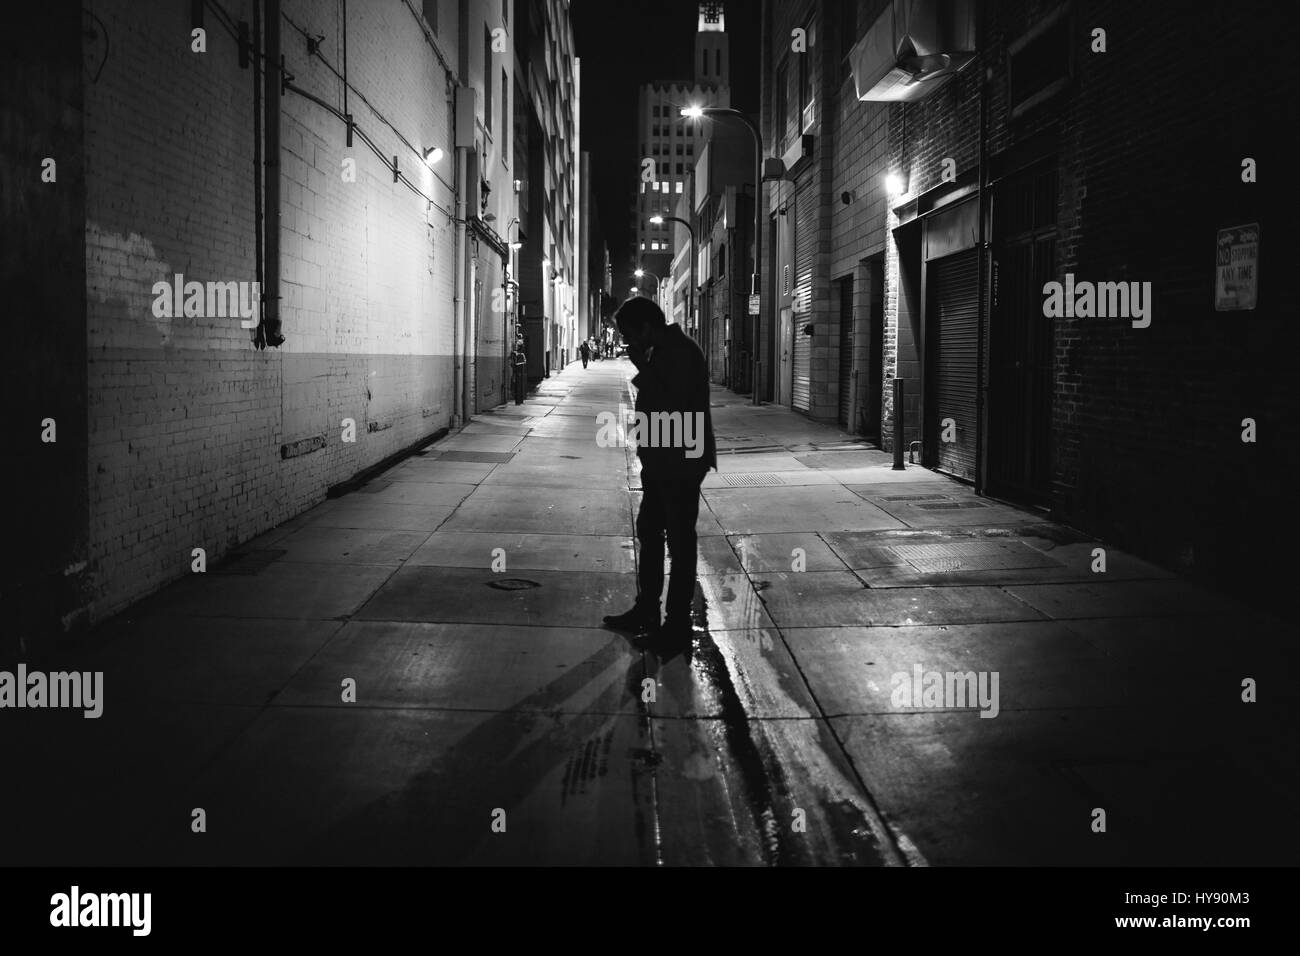 A Man standing in an alley off a street in Santa Monica. He appears to be taking a smoke break from a party that is happening in a restaurant next doo. Stock Photo